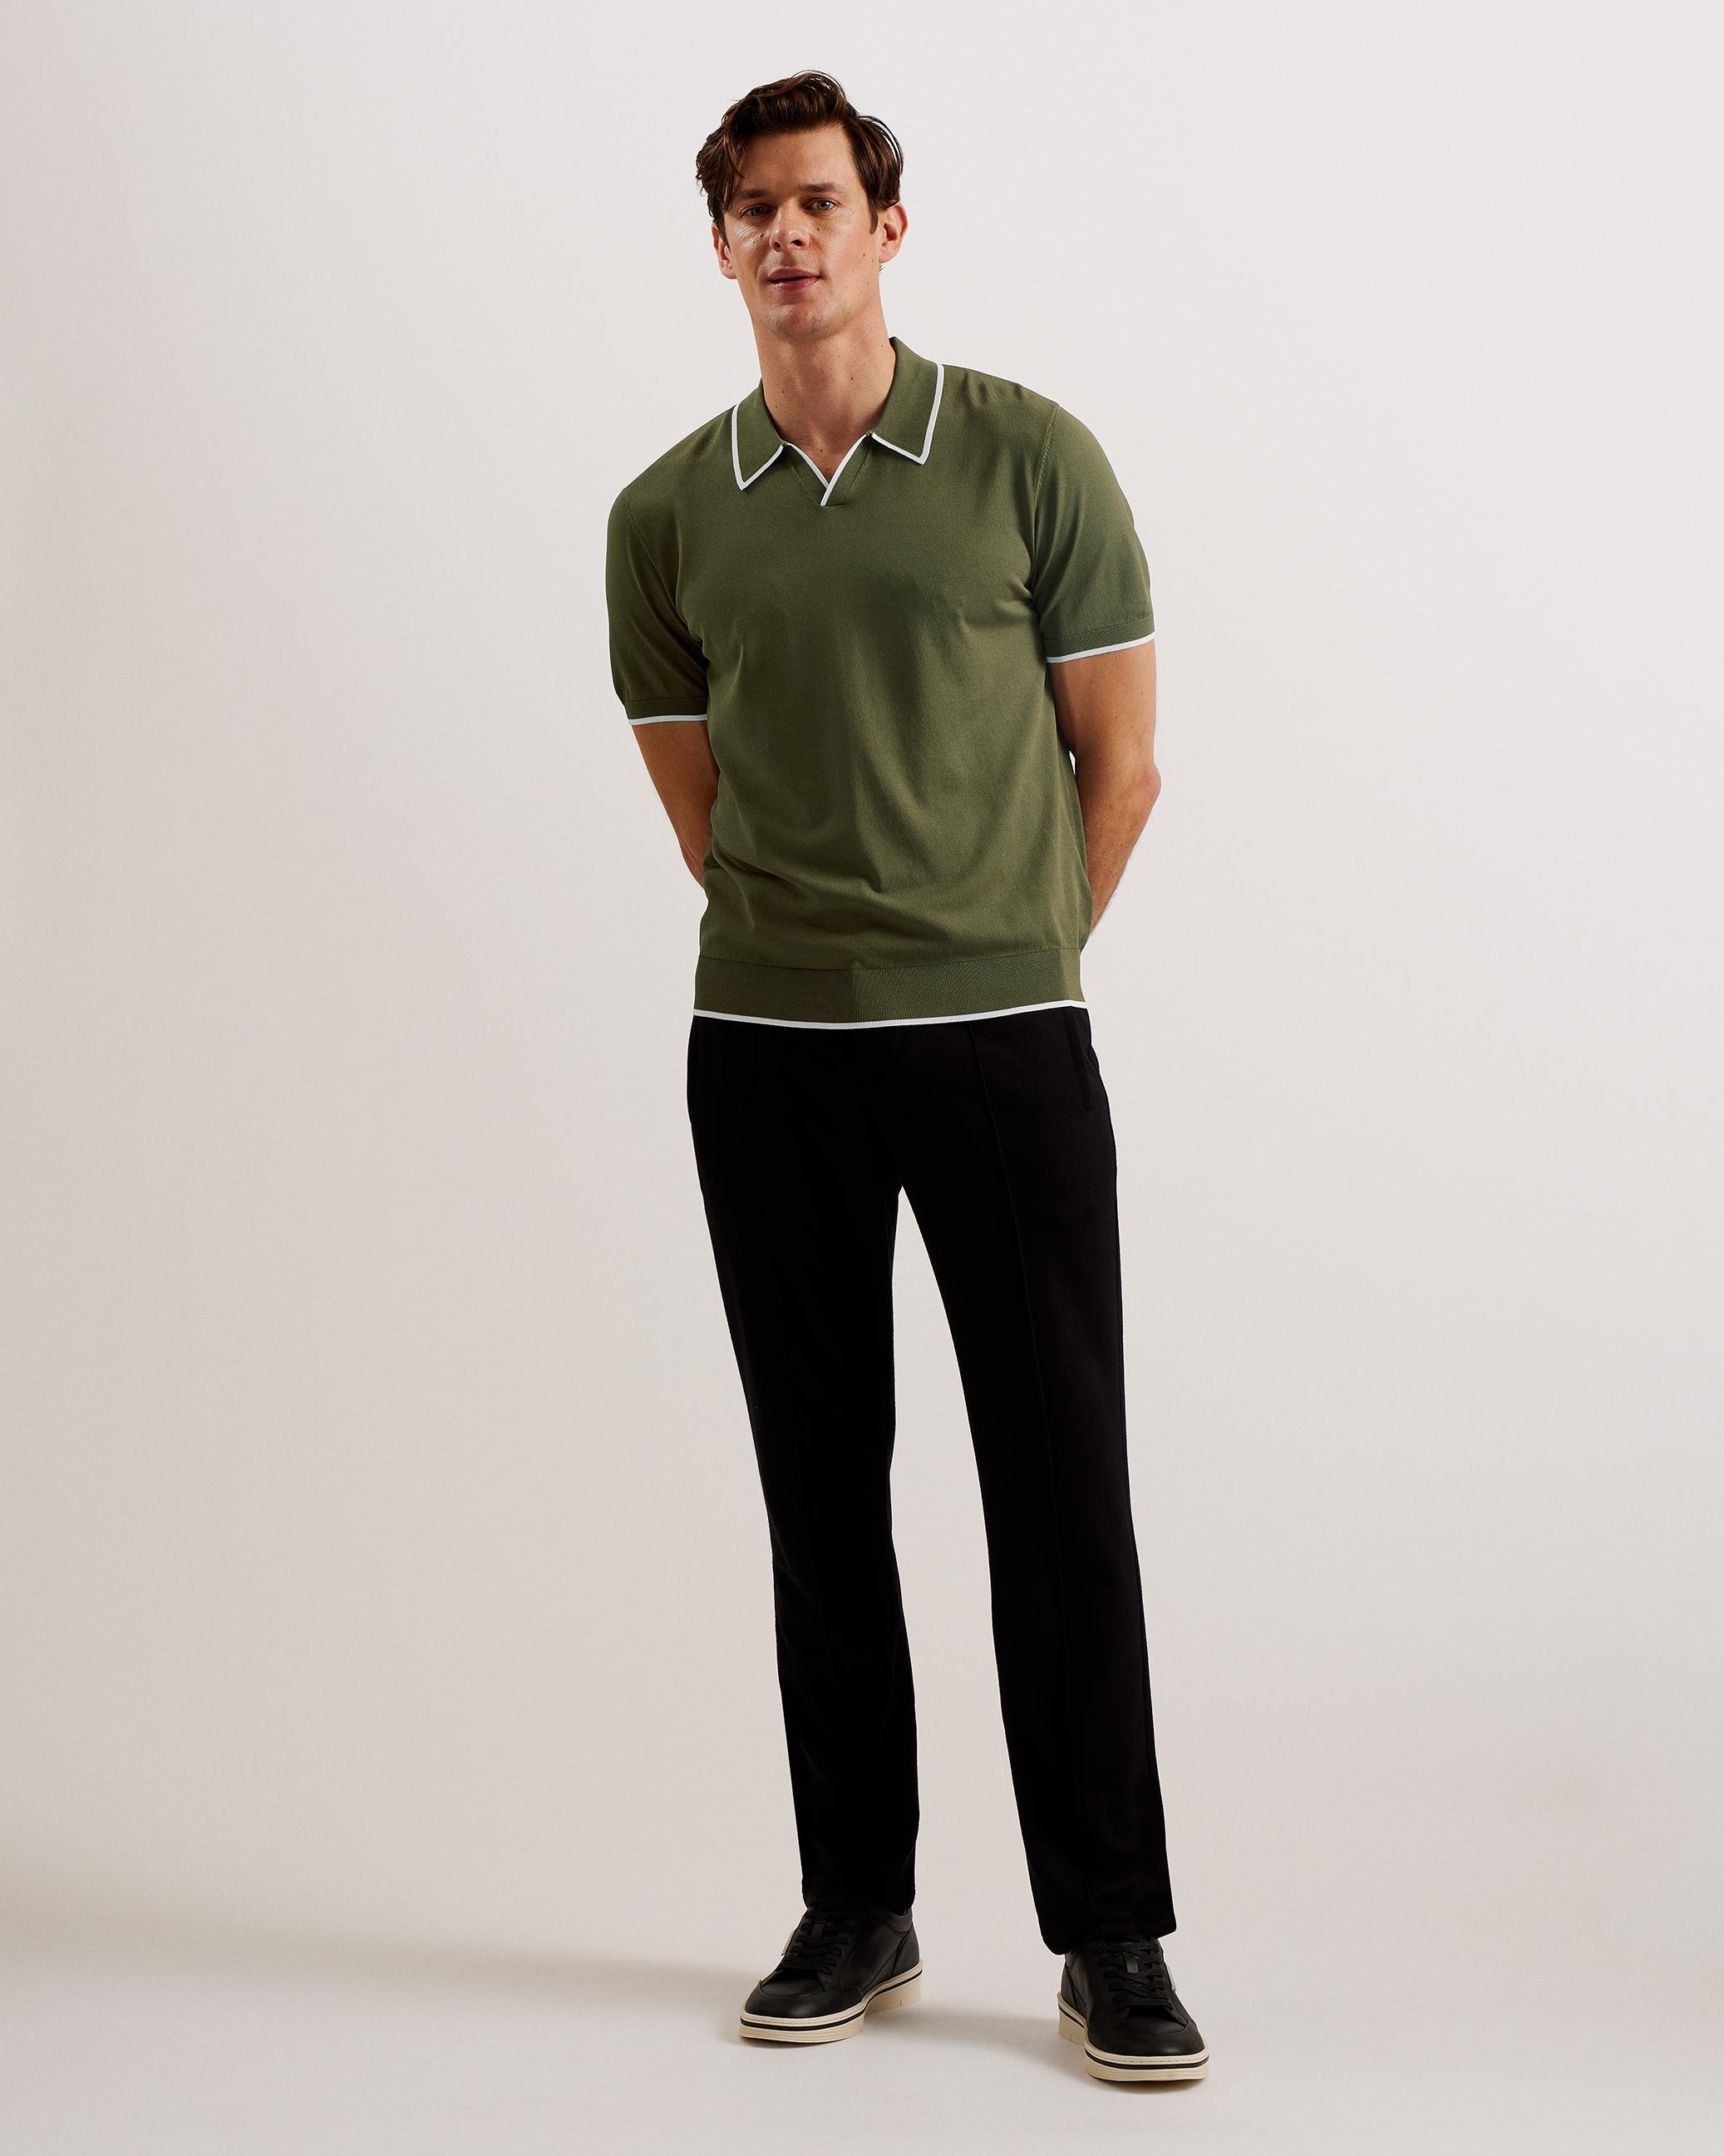 Short Sleeve Rayon Polo Shirt - STORTFO - Olive by TED BAKER